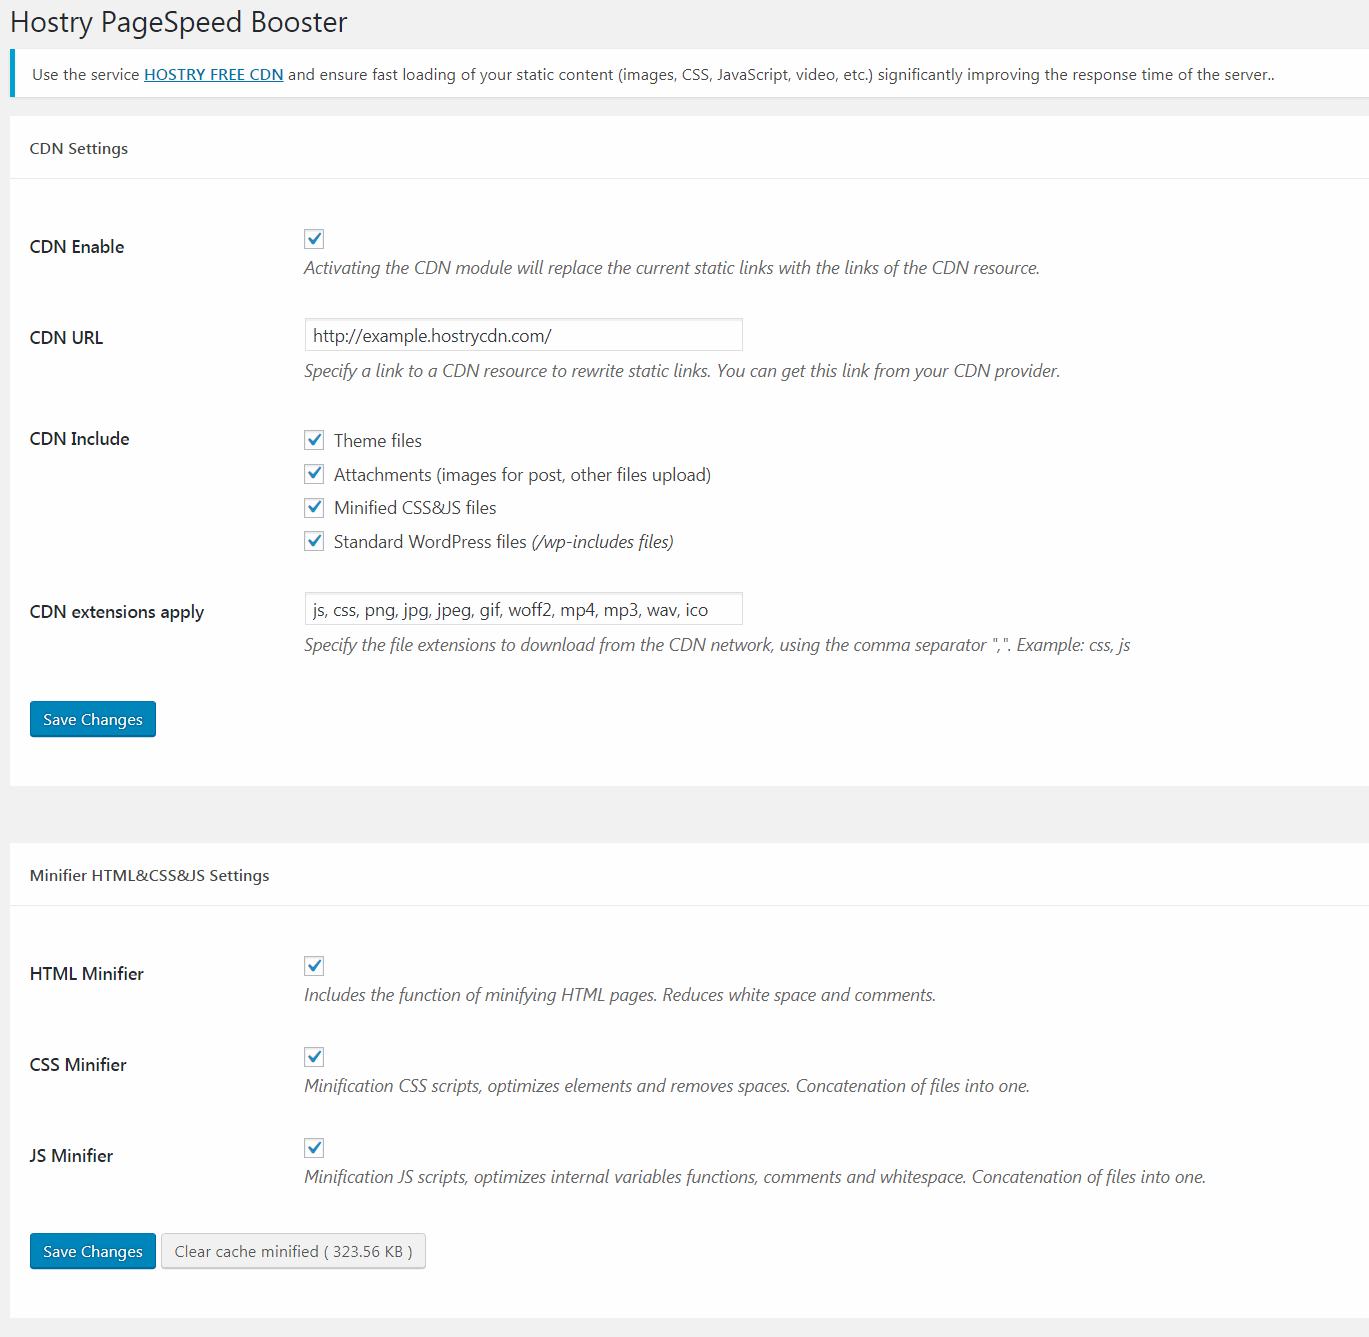 Hostry PageSpeed Booster - Settings page